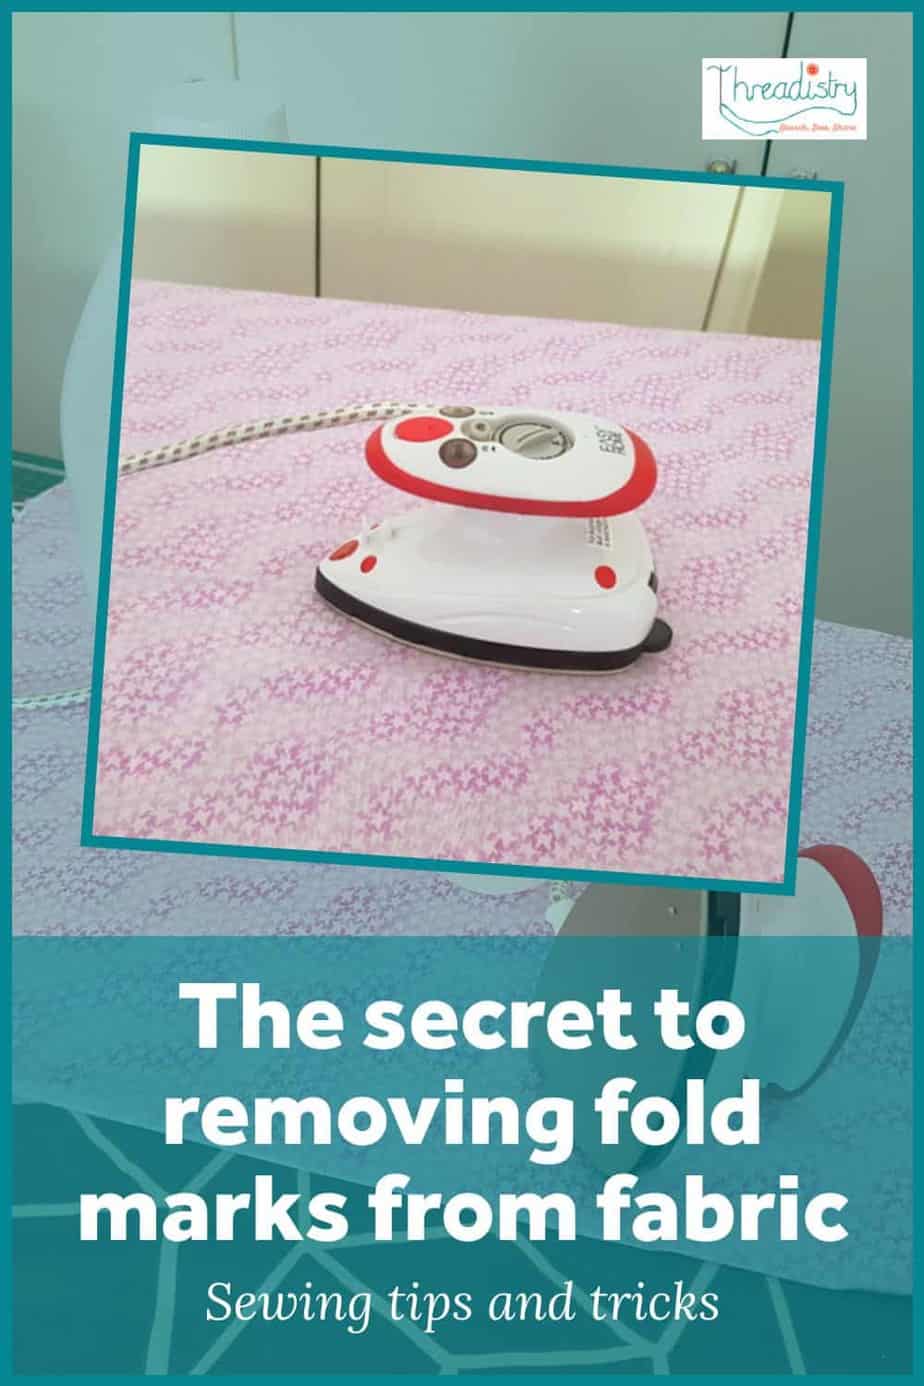 A small iron resting on fabric with text overlay "The Secret to removing fold marks from fabric"